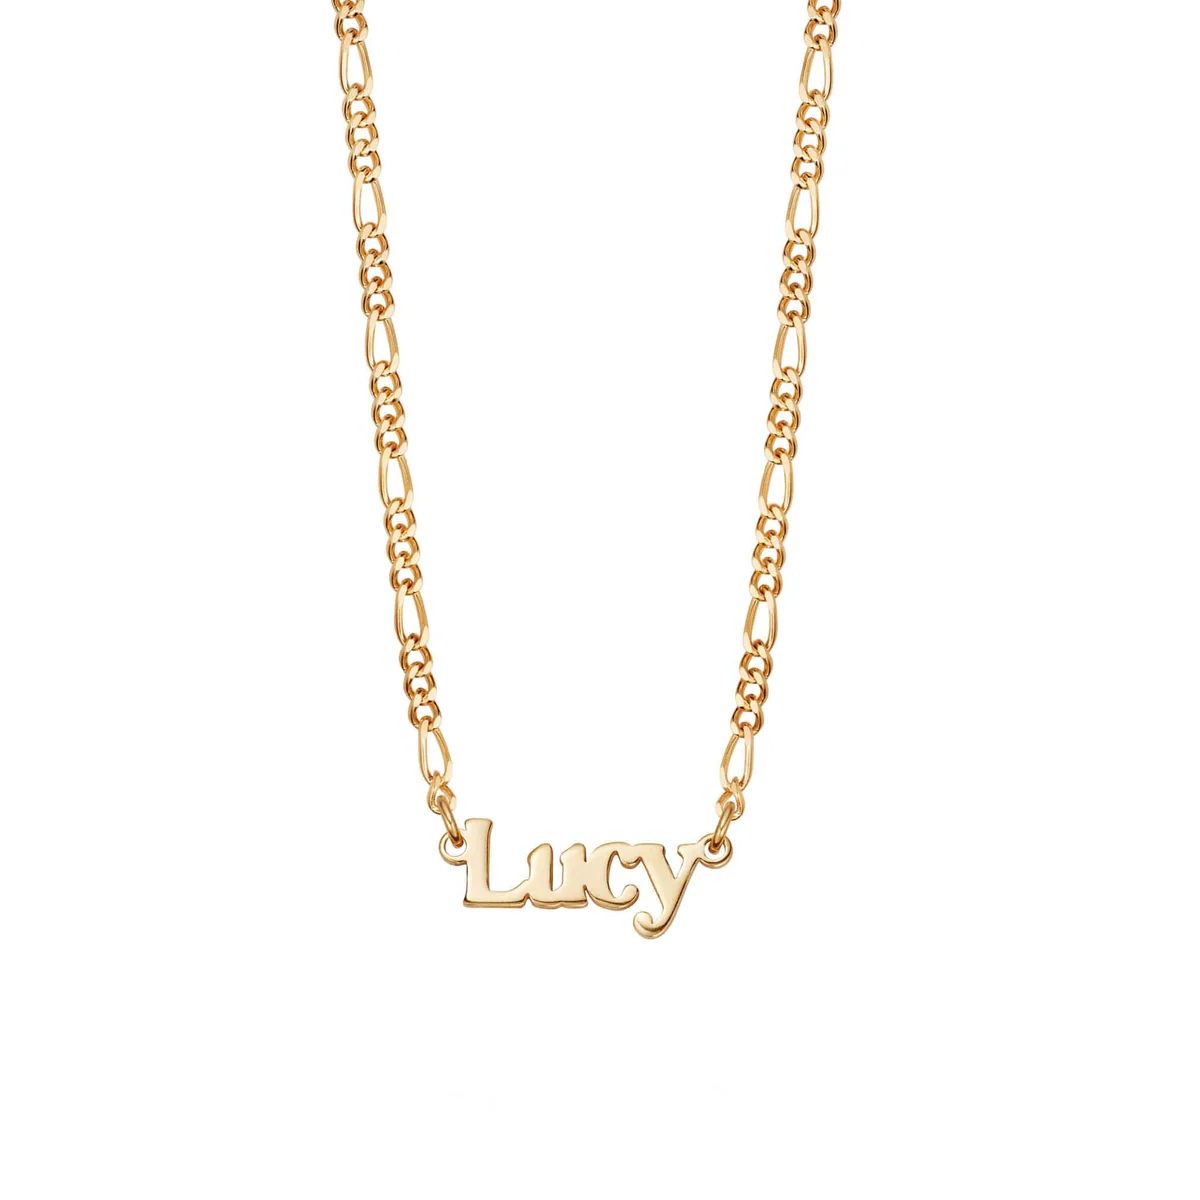 Personalised Name Necklace 18ct Gold Plate | Daisy London Jewellery